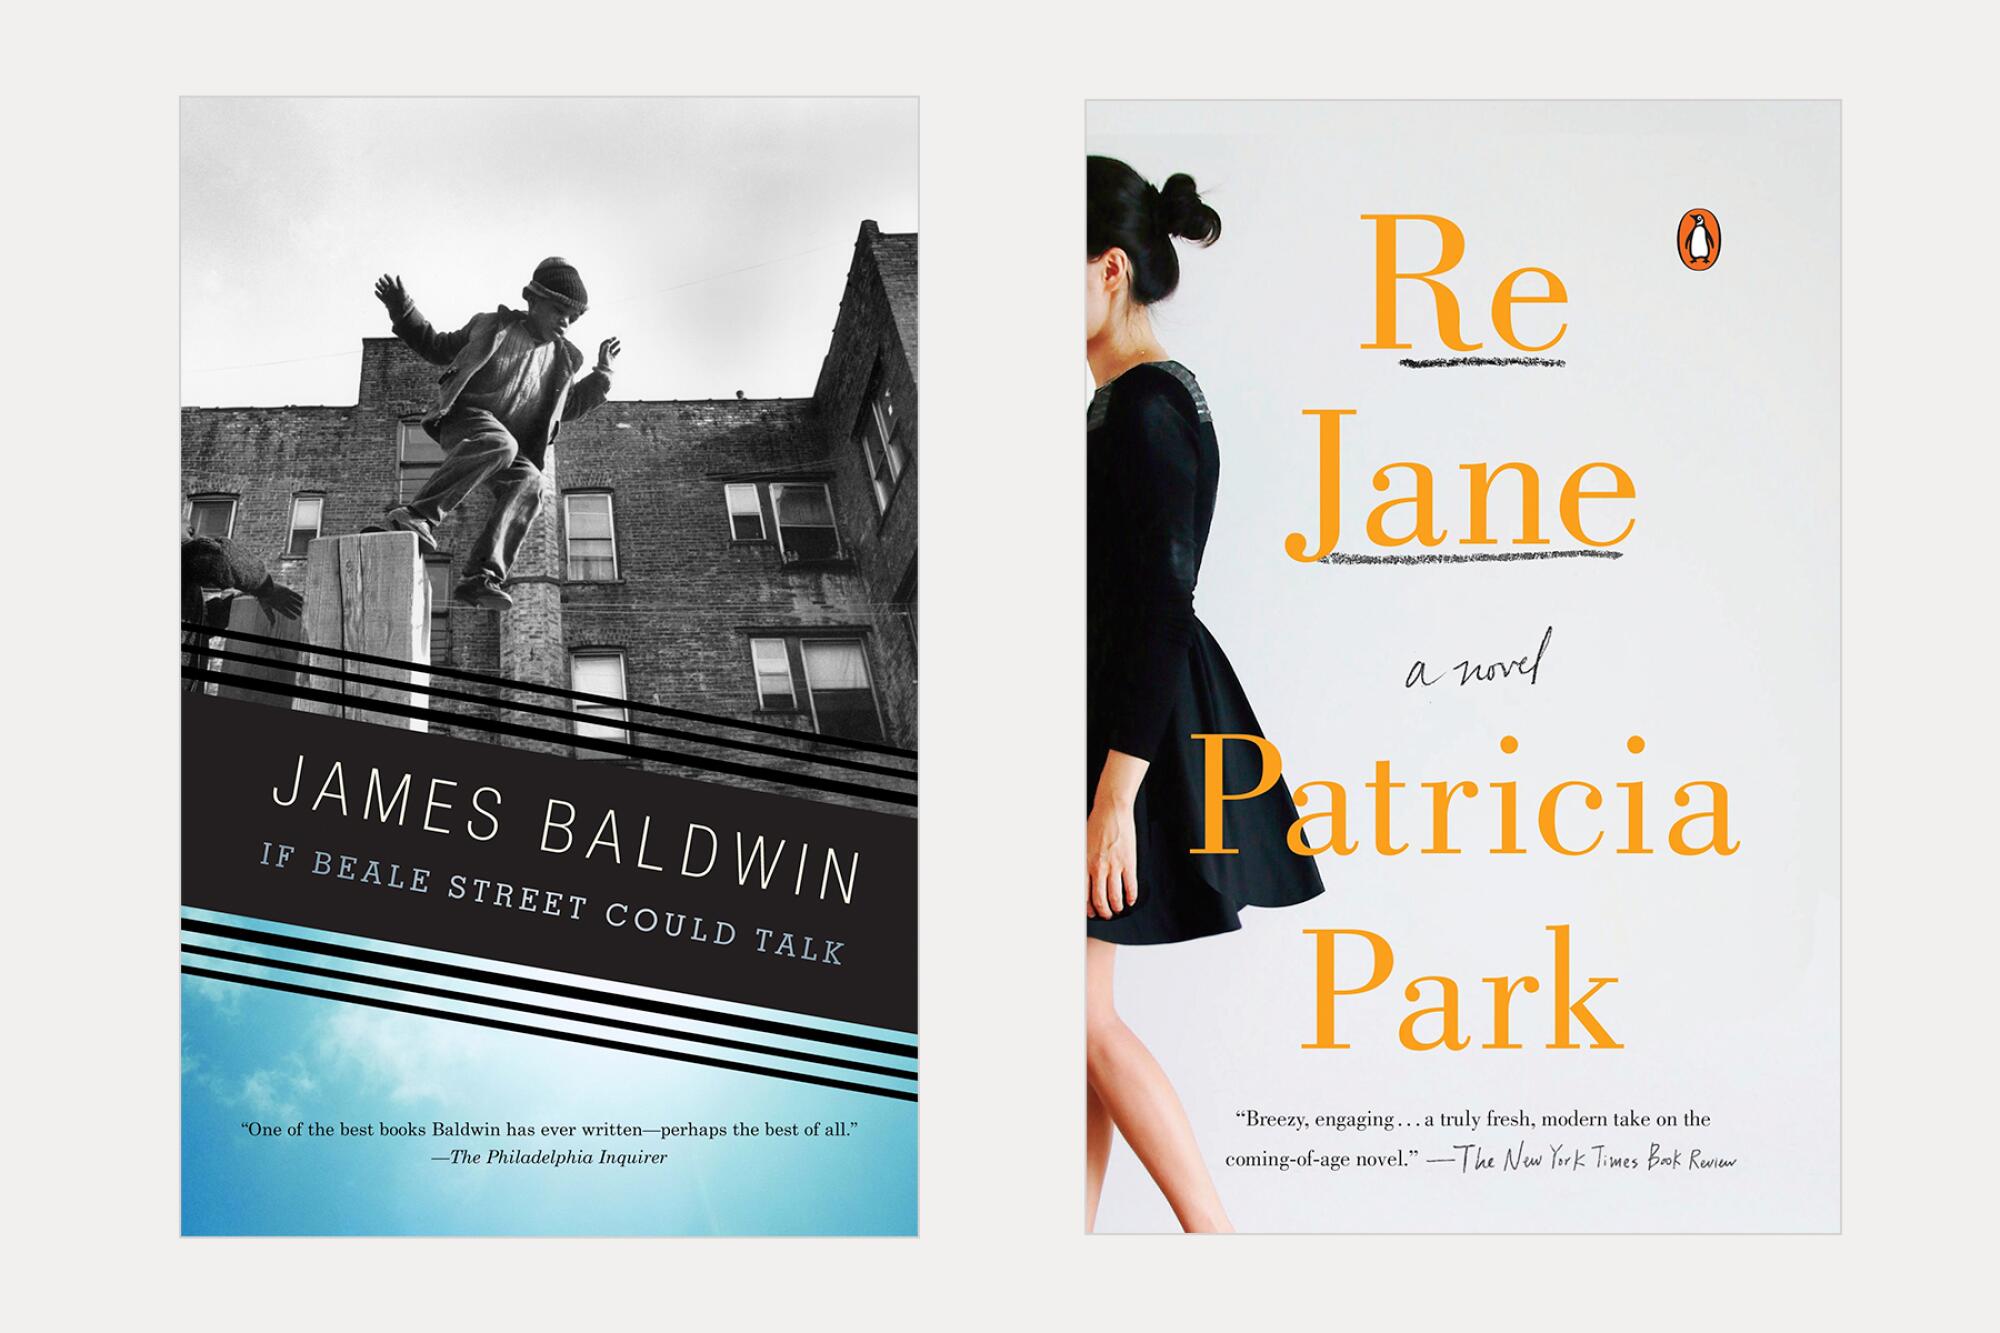 two book covers: If Beale Street Could Talk by James Baldwin and Re Jane, a Novel by Patricia Park